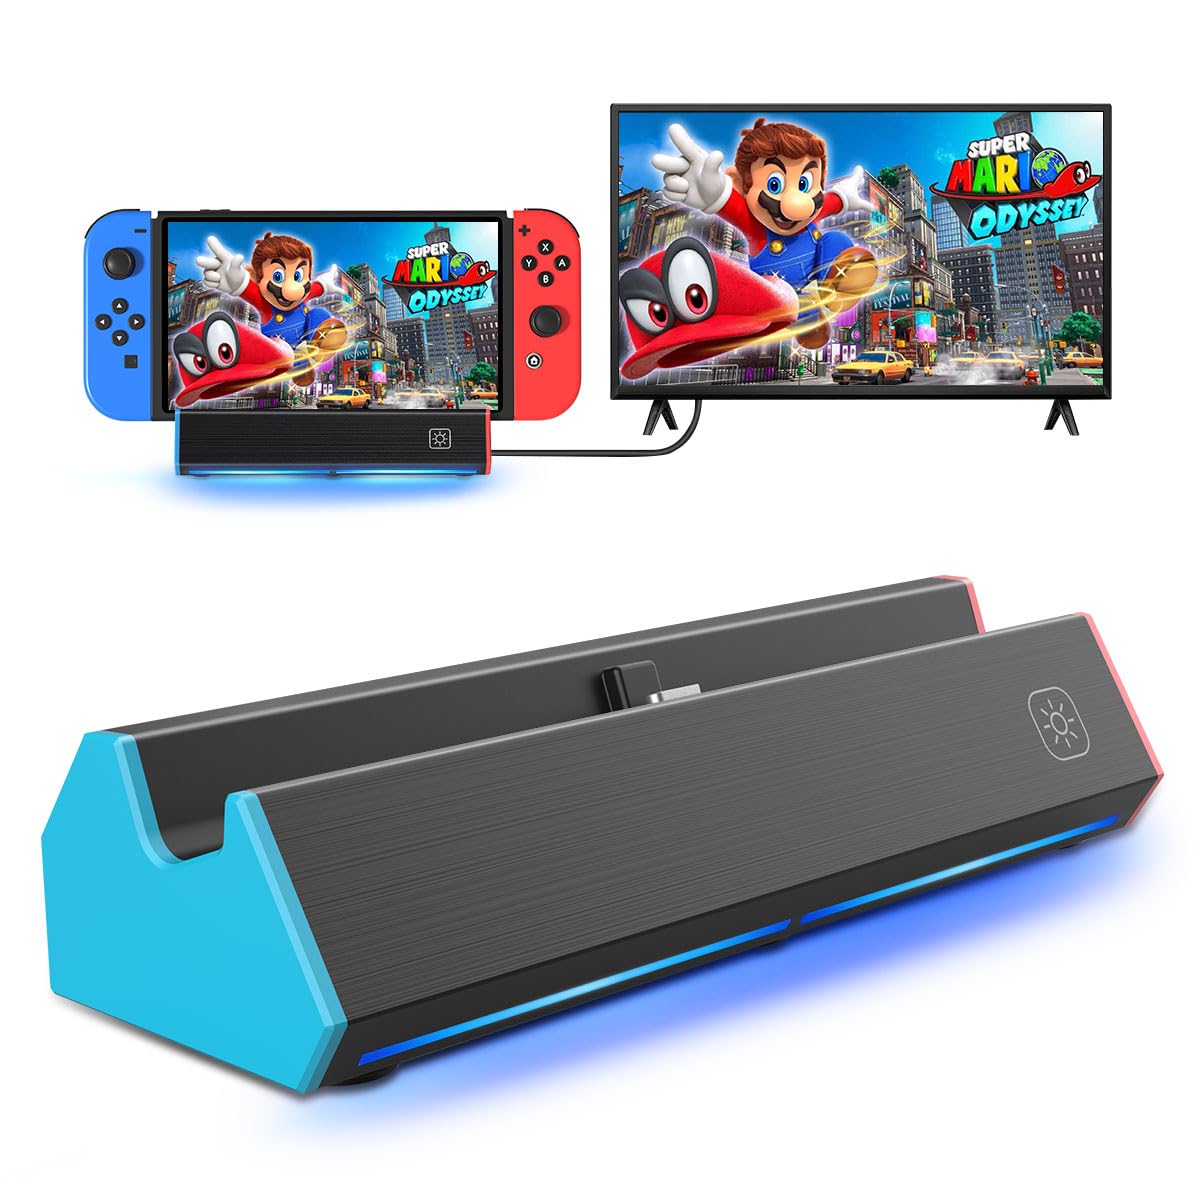 Switch Dock, TV Docking Station for Nintendo Switch/Switch OLED,Portable Switch Charging TV Dock Replacement with 4K HDMI Adapter/Type C Port/USB Port for Official Nintendo Switch (Normal Model)